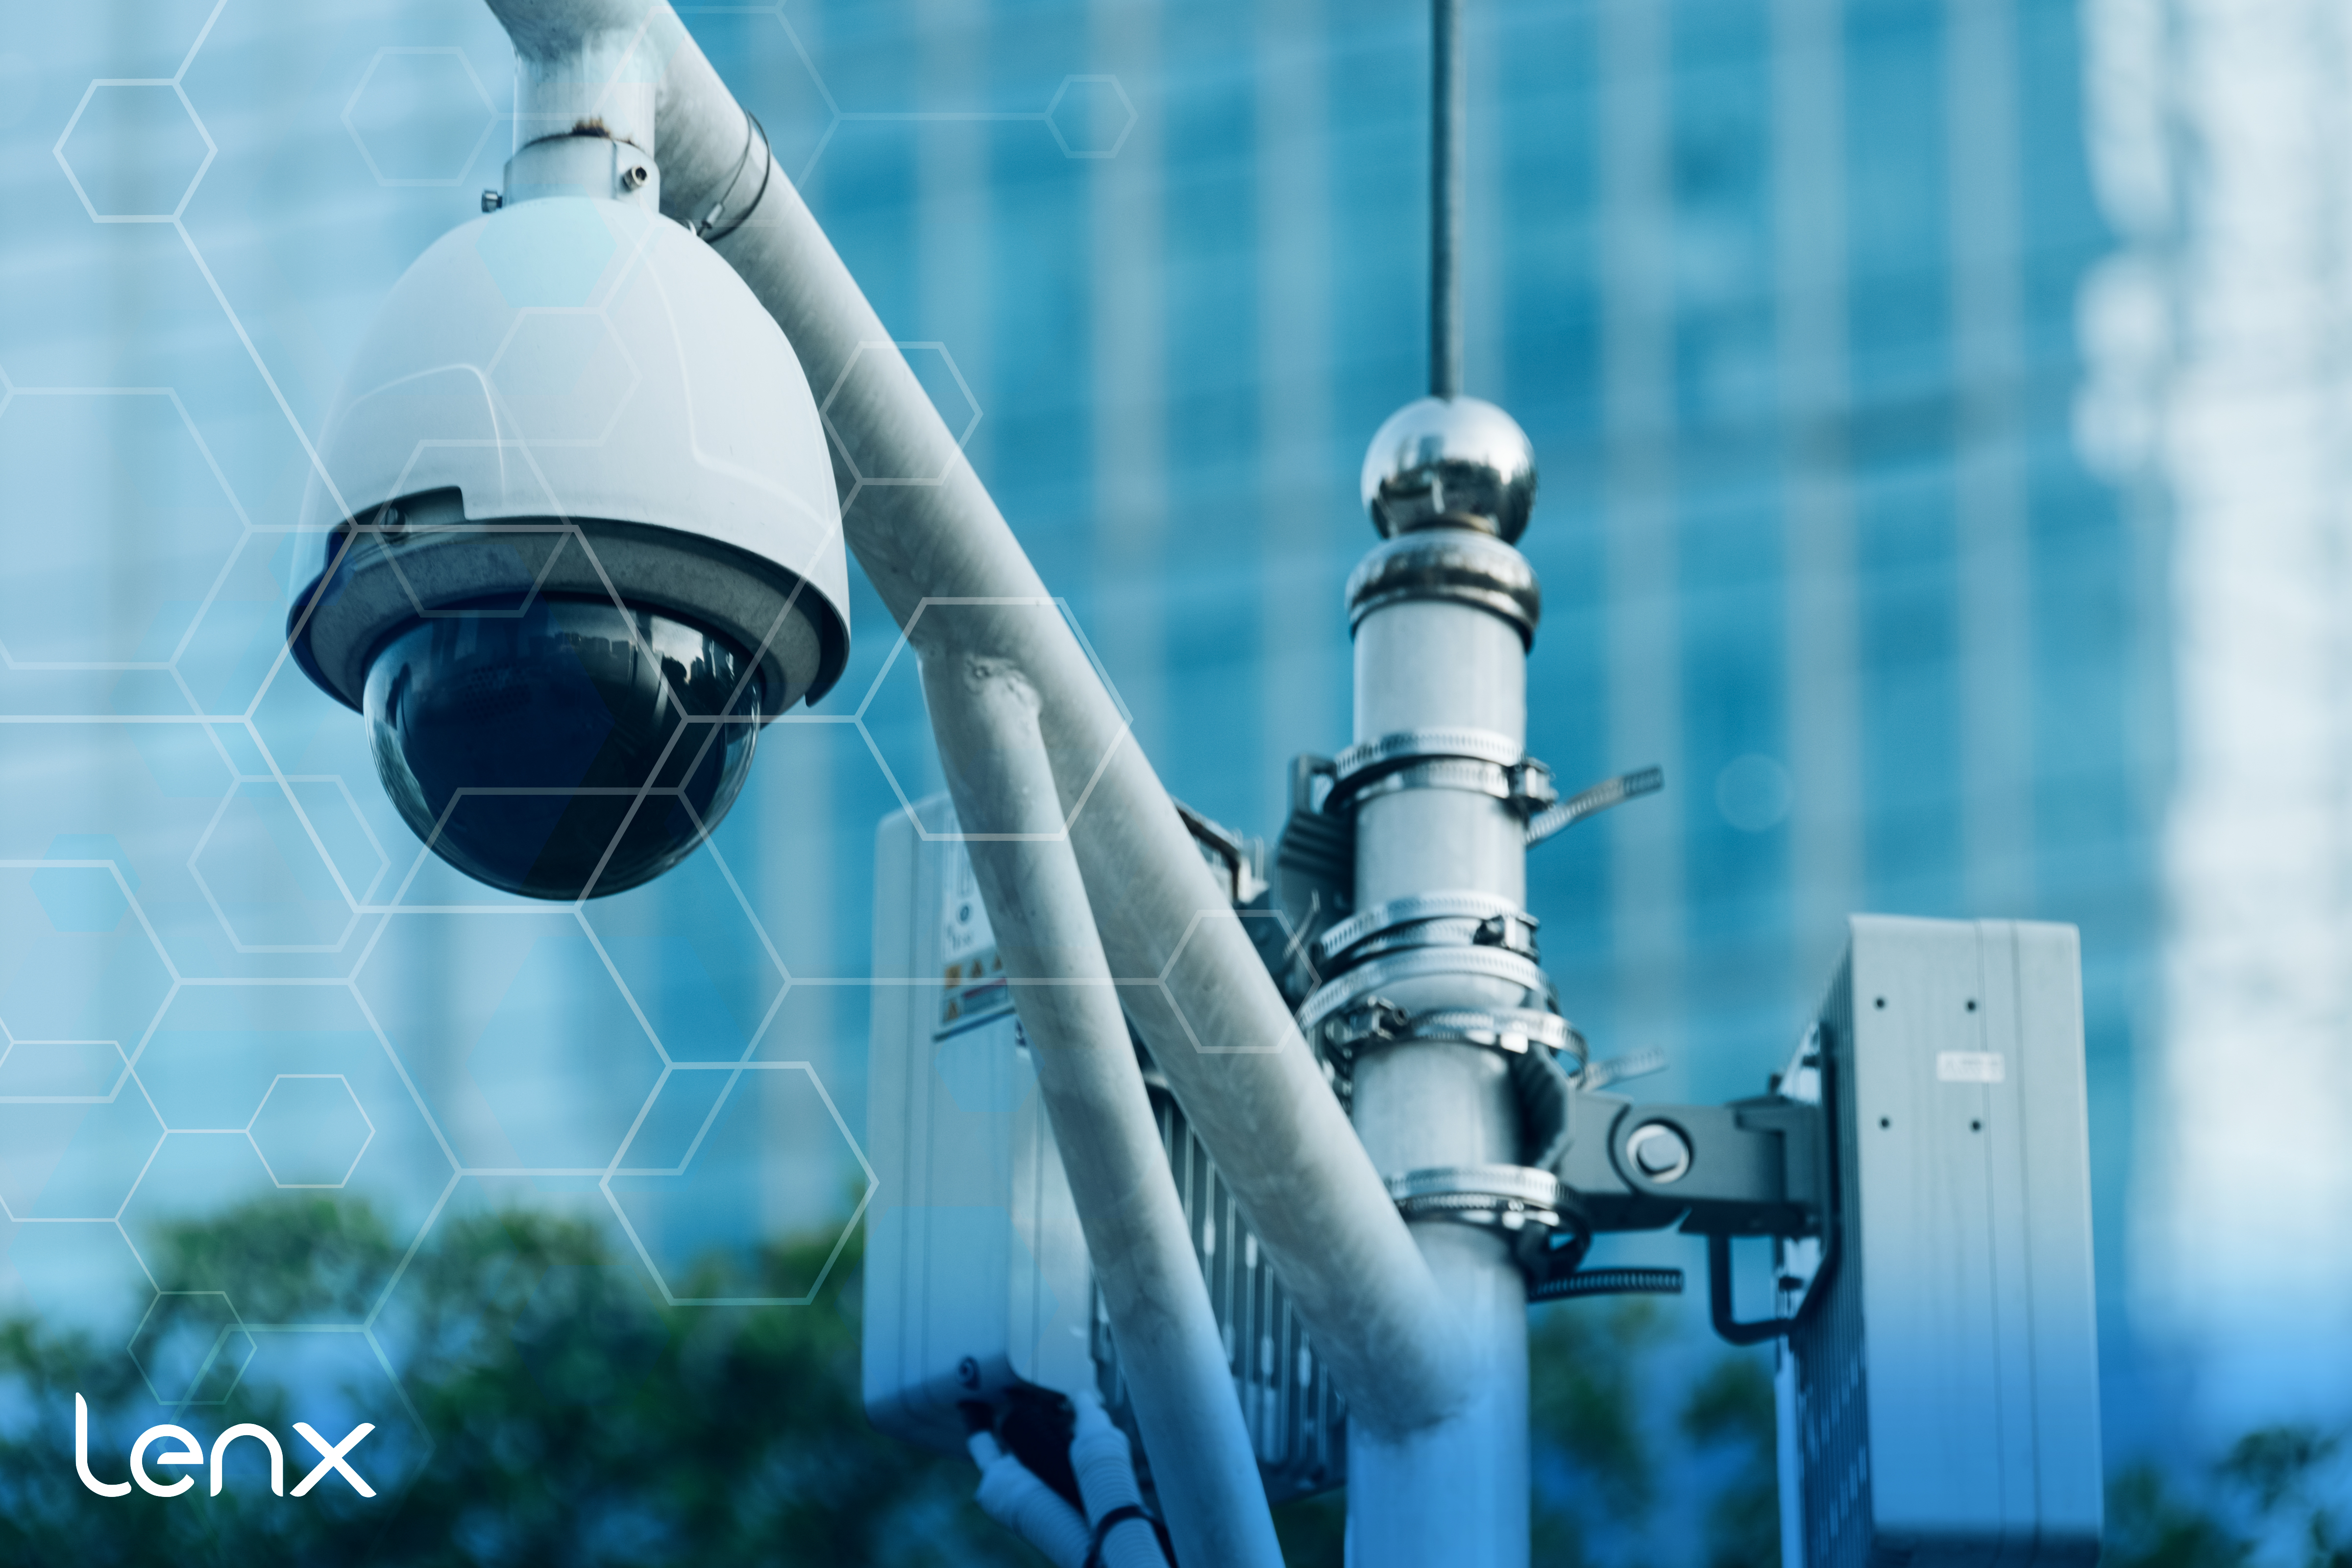 Using AI Security And Active Shooter Detection Systems To Continuously Monitor Cameras